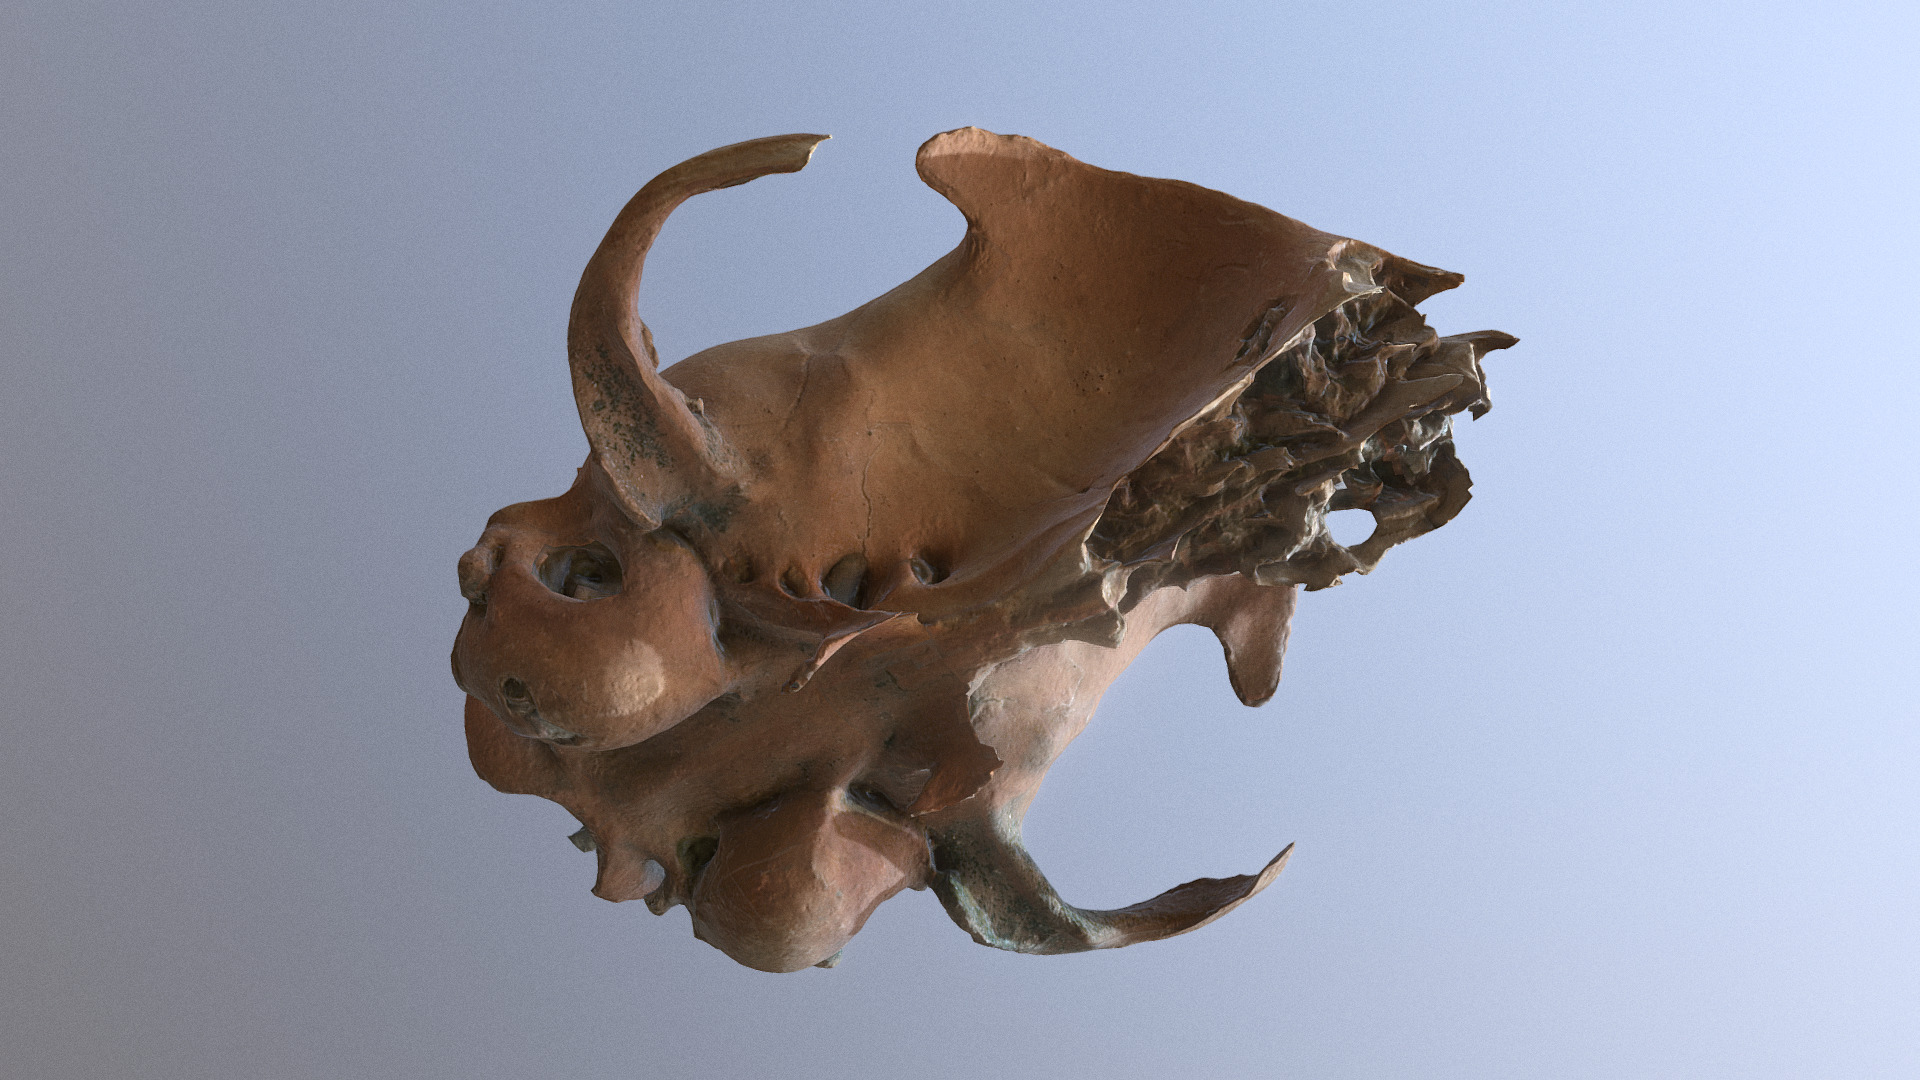 3D model Small Skull nr 2 (high poly) - This is a 3D model of the Small Skull nr 2 (high poly). The 3D model is about a small brown animal.